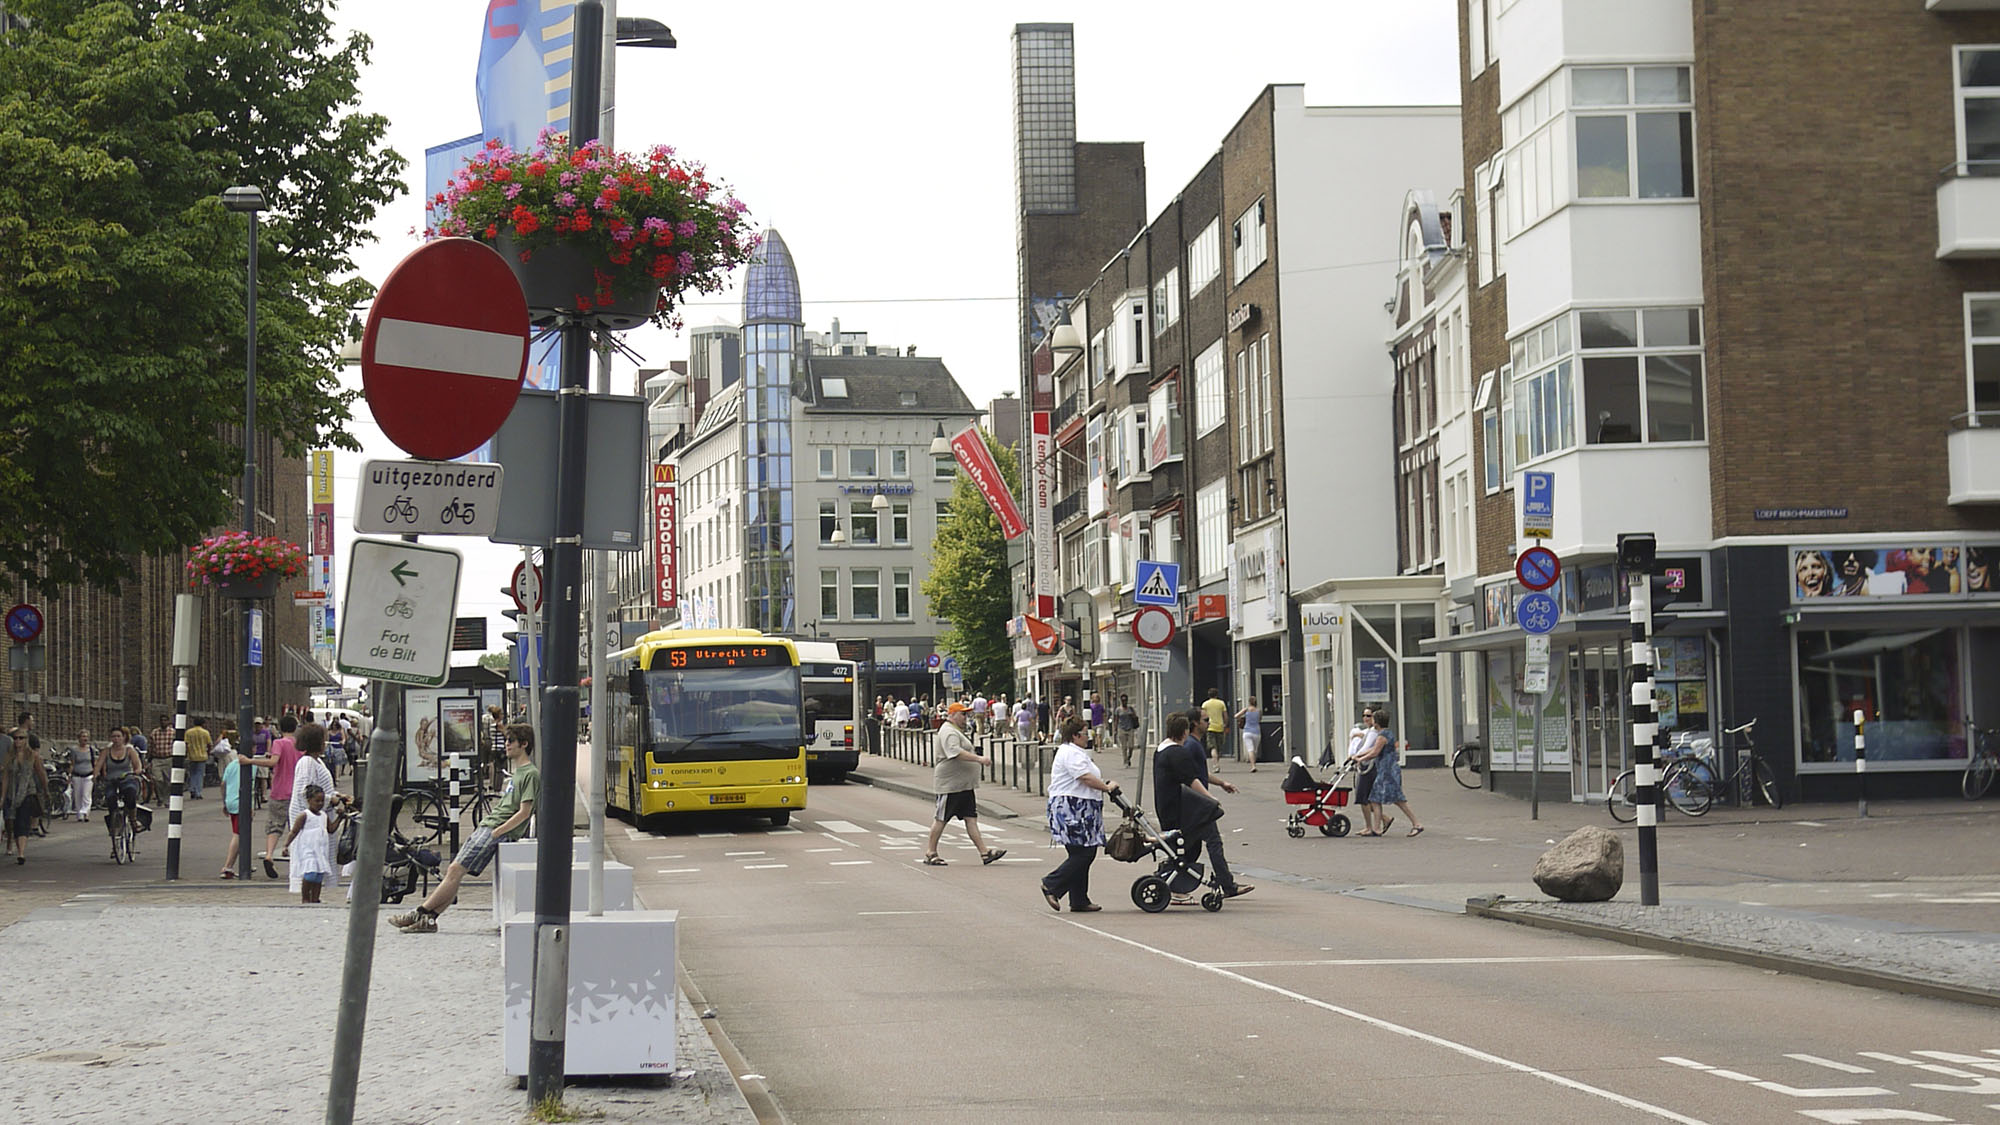 Fig. 22.38 Transit mall in Utrecht, Netherlands. Deliveries are made very early in the morning, or via side streets.